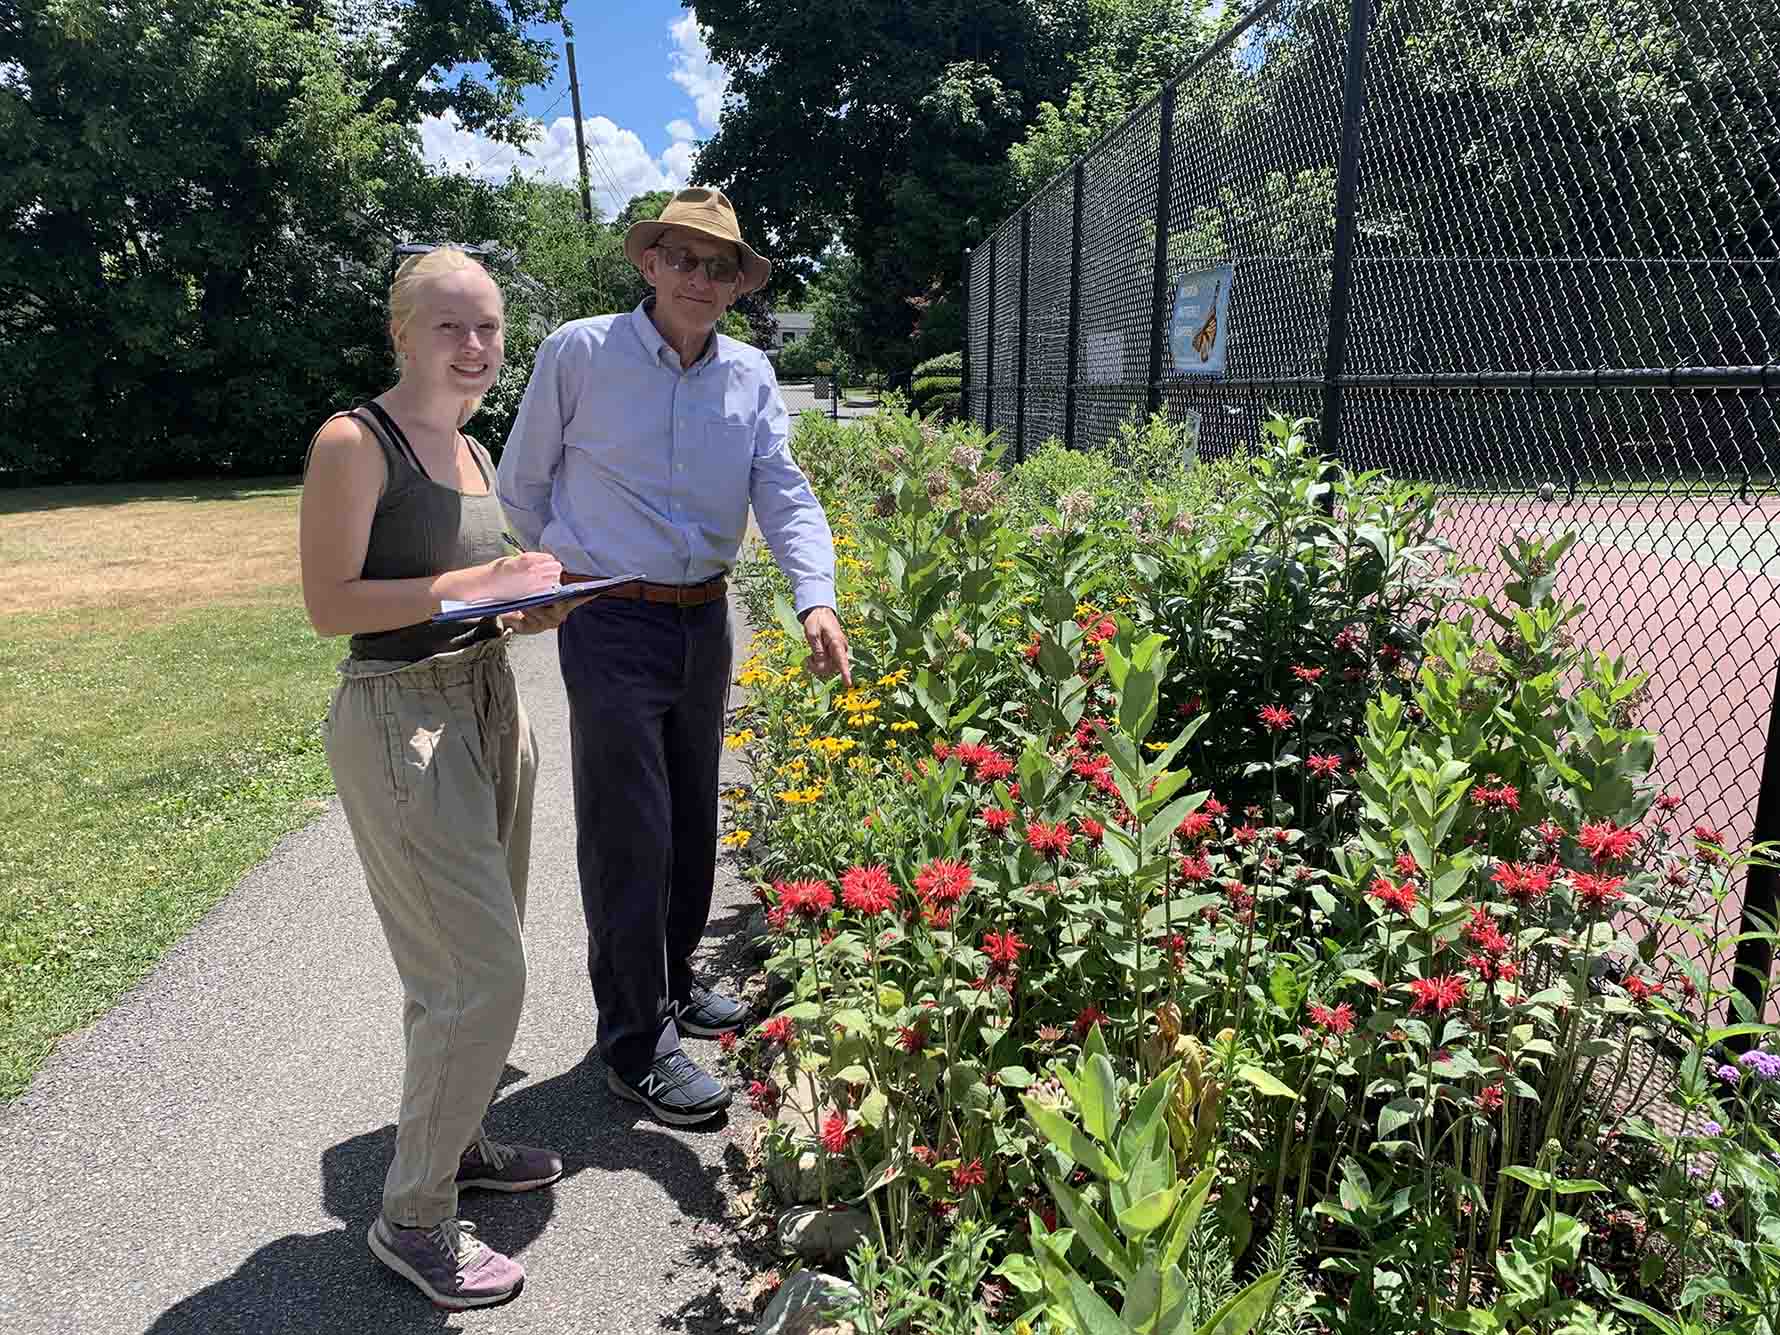 Photo: Selby Vaughn (left) and Richard Primack (right), wear summer outfits as they observe colorful pollinator plants on BU's campus.